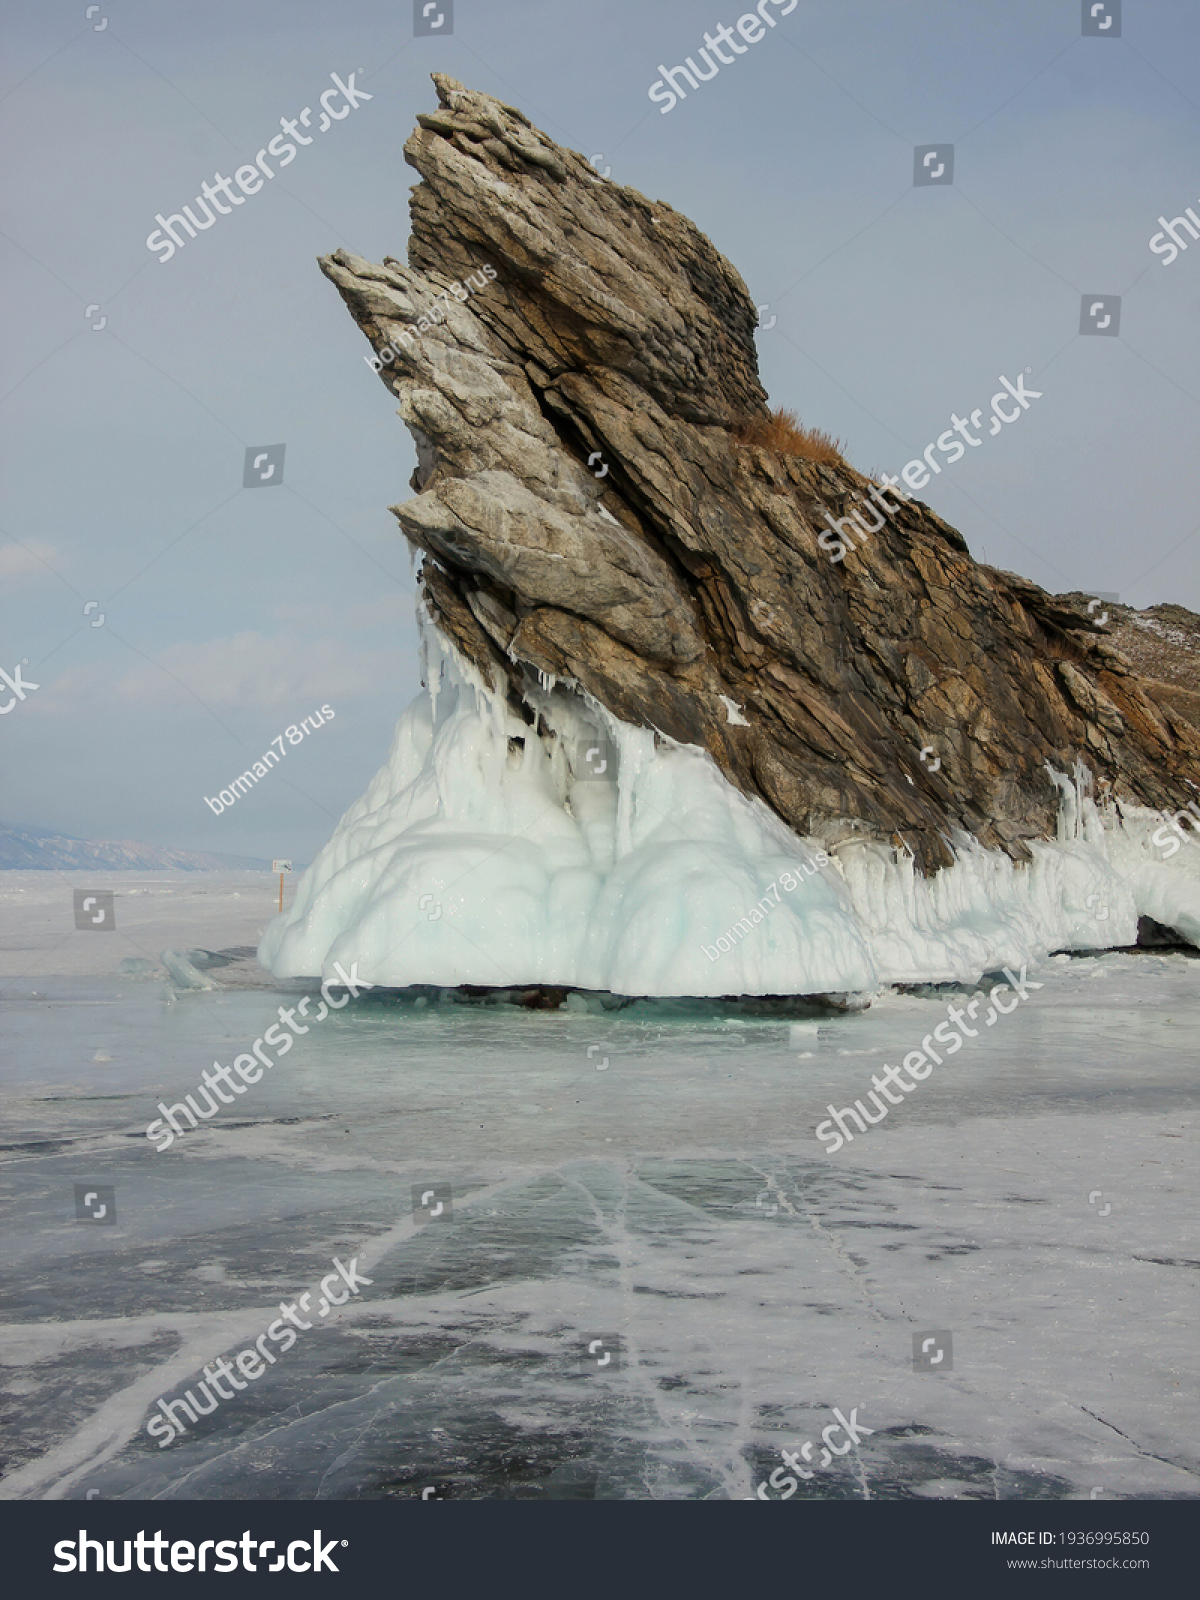 Dramatic graphical gray rock sharp texture white coastal splash ice Ogoy island Baikal lake Russia. Snow field landscape. Winter clouds overcast Visited popular innocent Tourism journey.  #1936995850